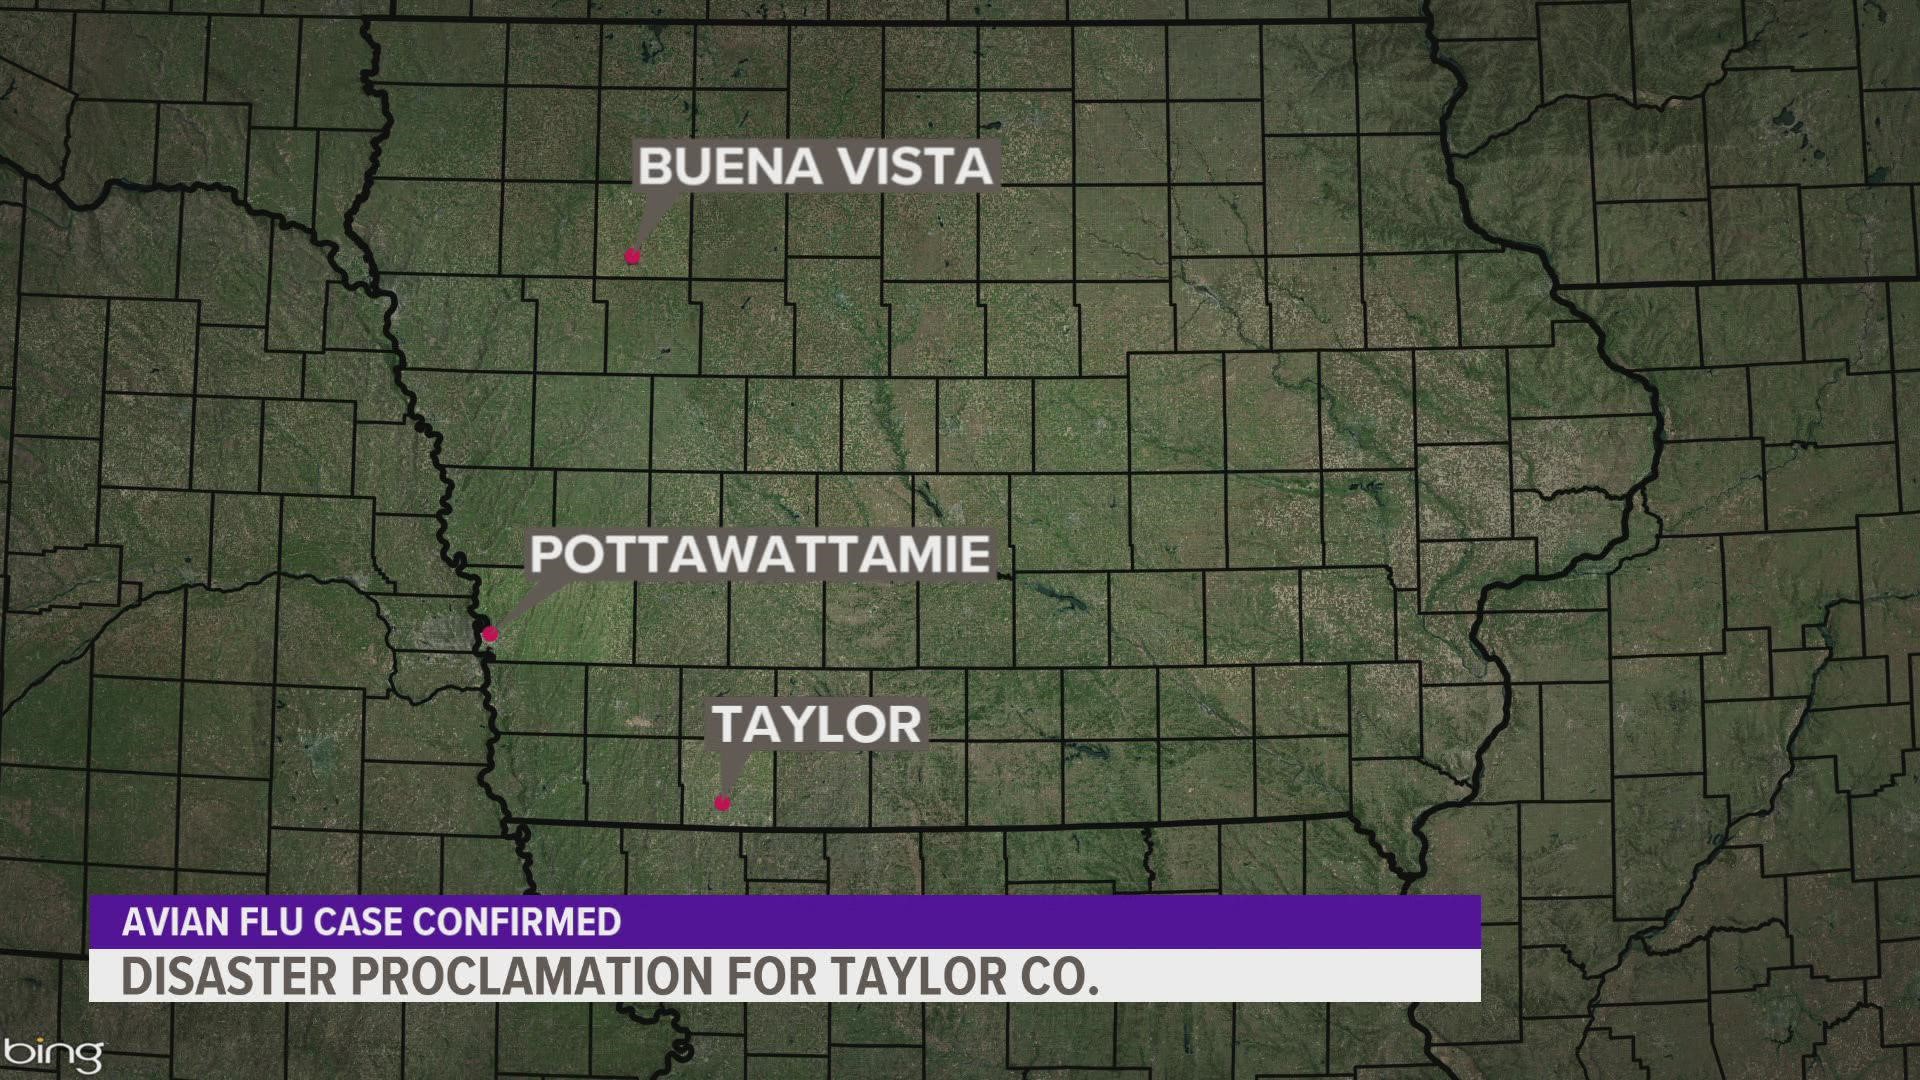 Cases have also been confirmed in Pottawatamie and Buena Vista counties.